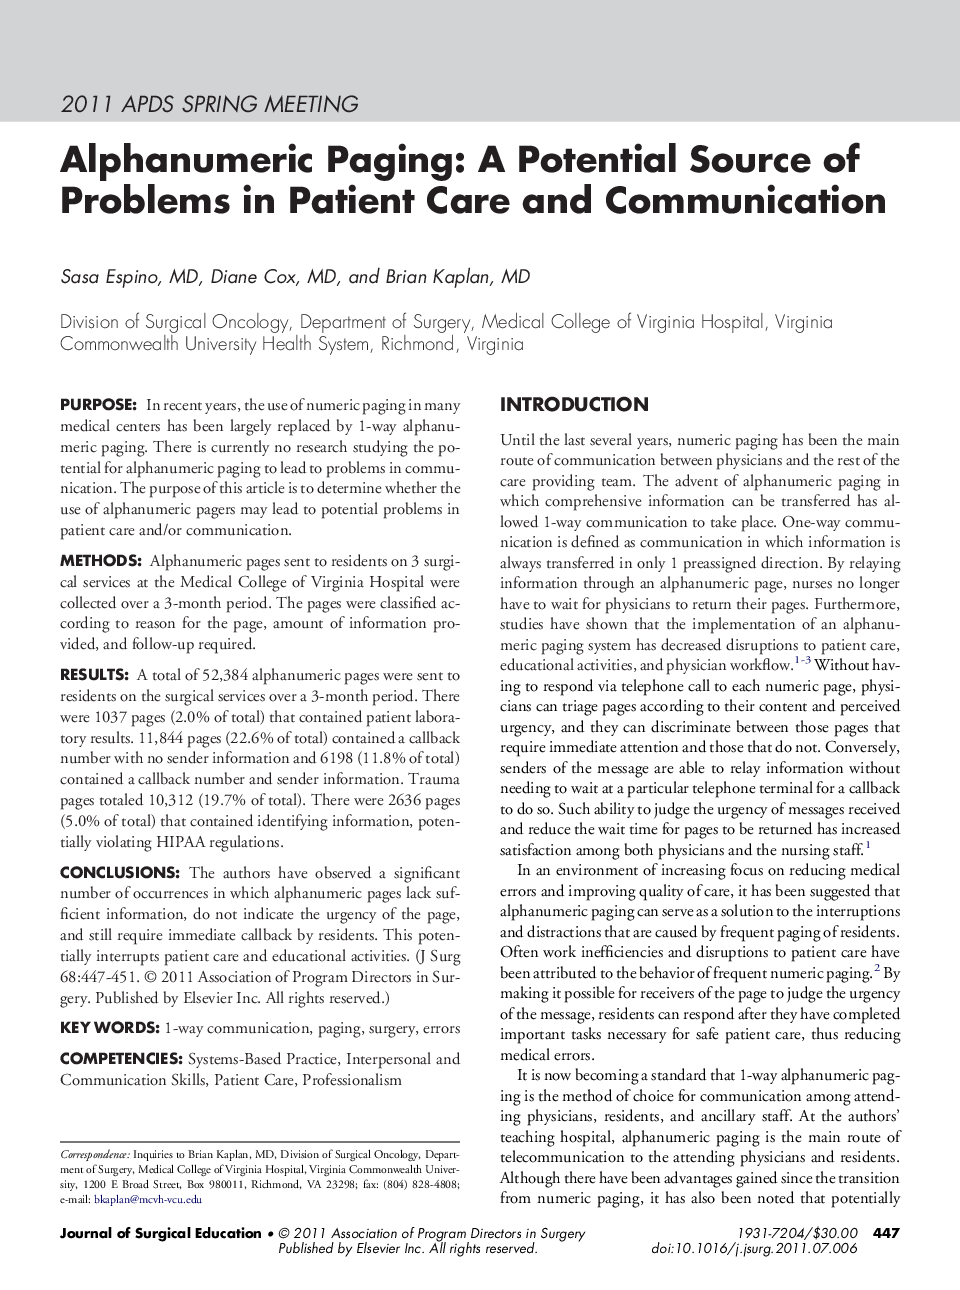 Alphanumeric Paging: A Potential Source of Problems in Patient Care and Communication